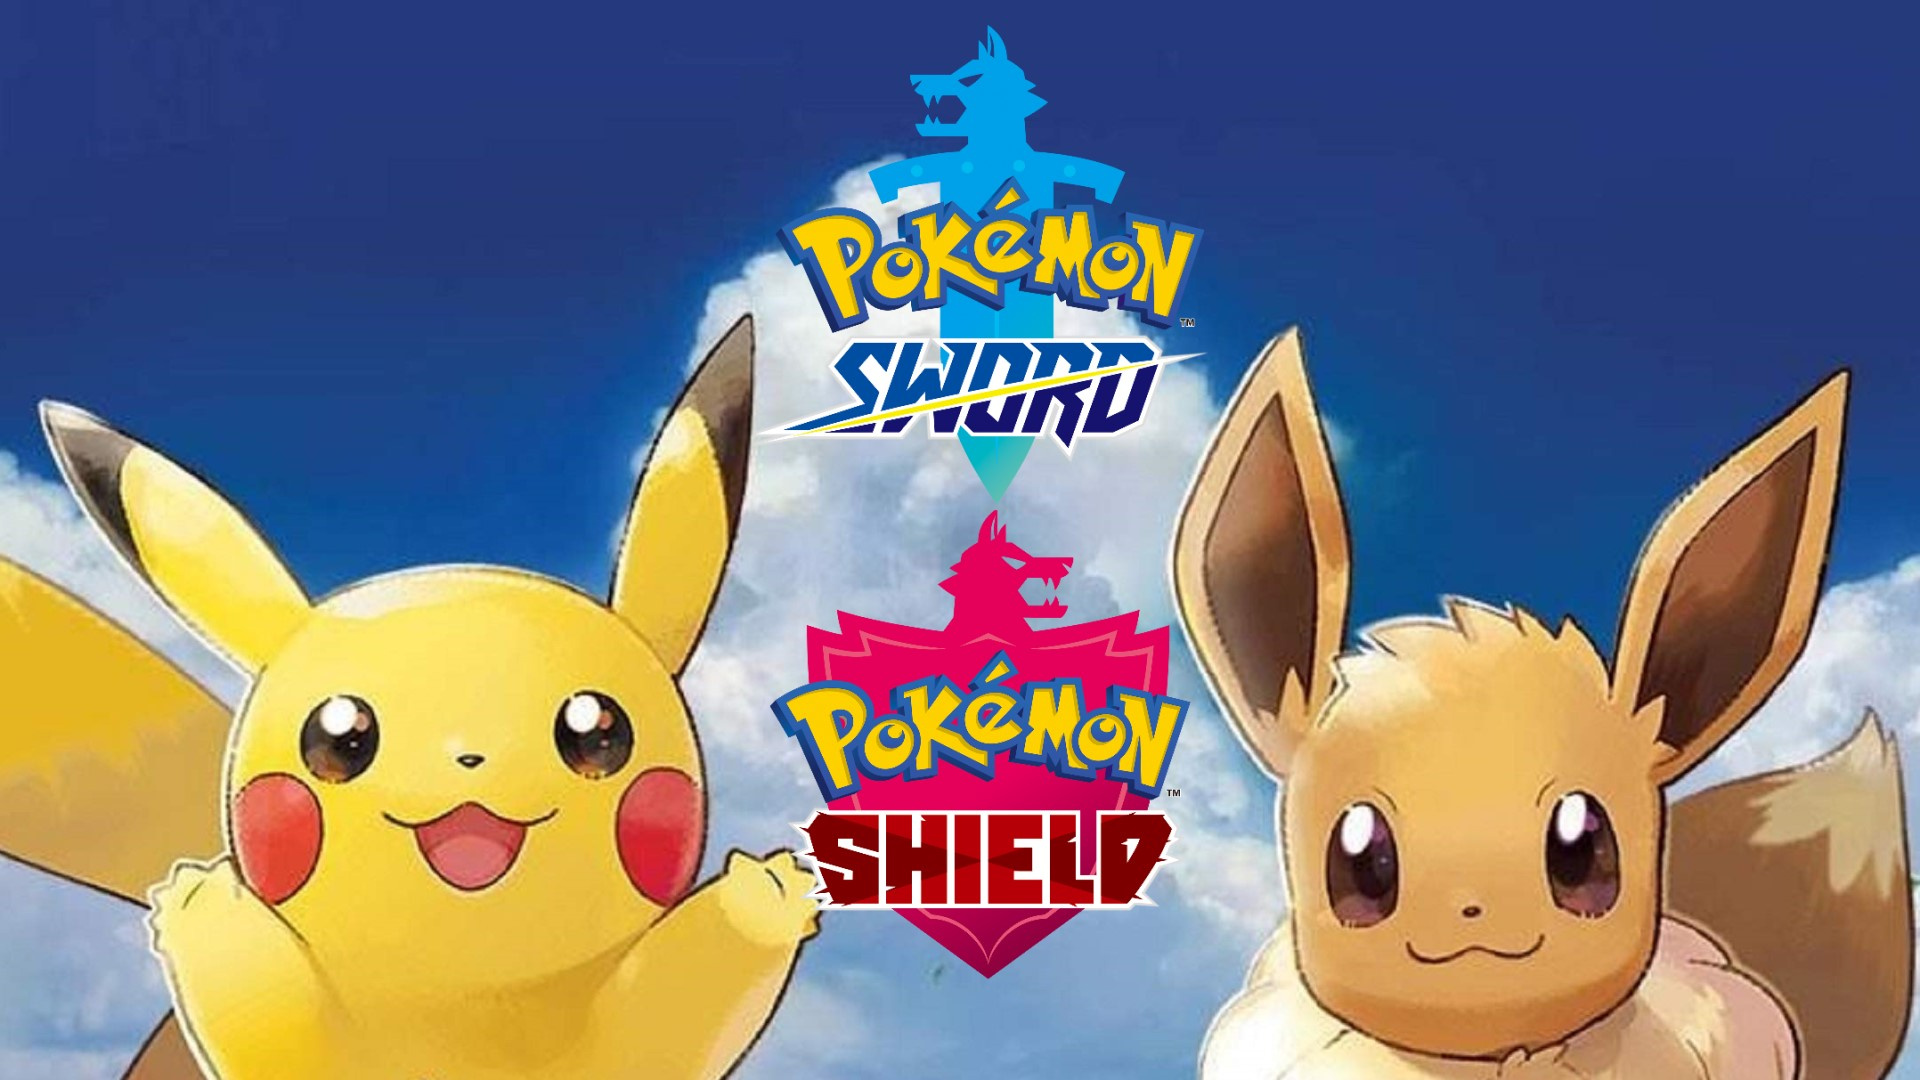 How To Claim Your Free Pikachu Or Eevee In Pokemon Sword And Shield If You Ve Played Pokemon Let S Go Pikachu Or Let S Go Eevee Guide Nintendo Life